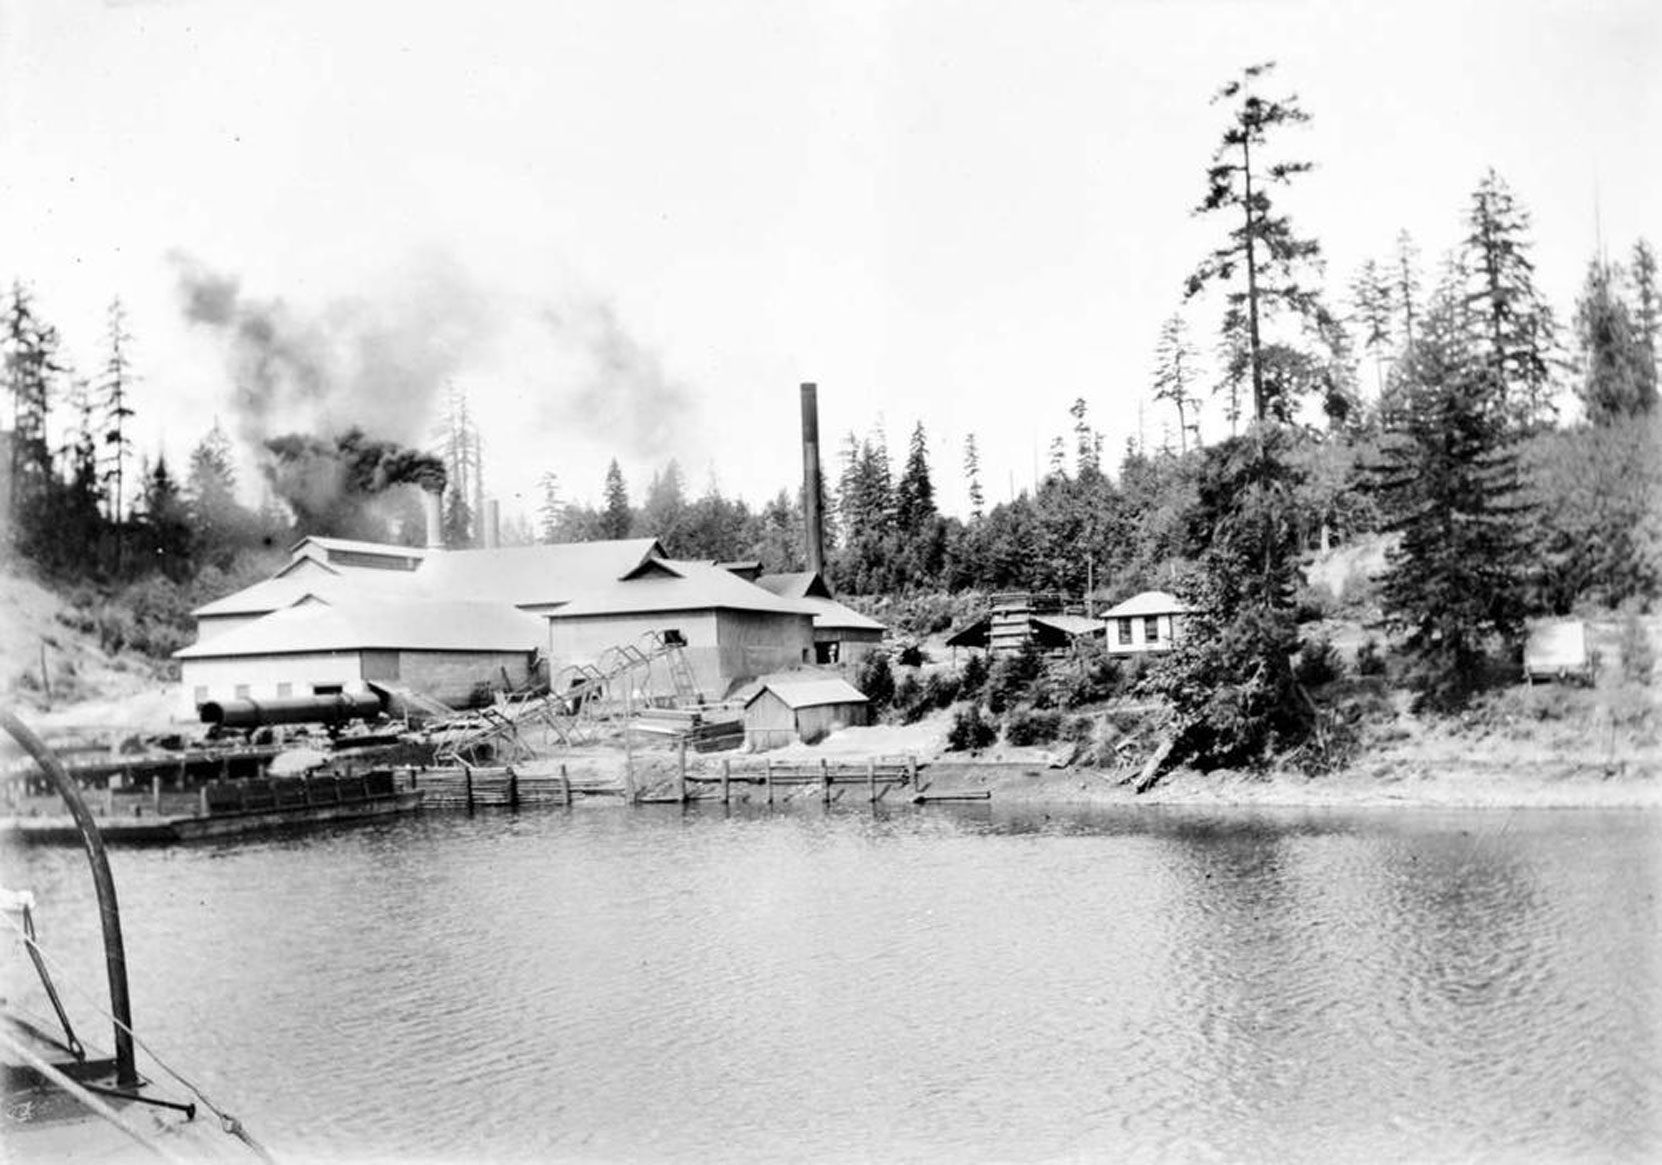 Vancouver Portland Cement Company plant at Tod Inlet, circa 1910 (BC Archives photo G-06193)